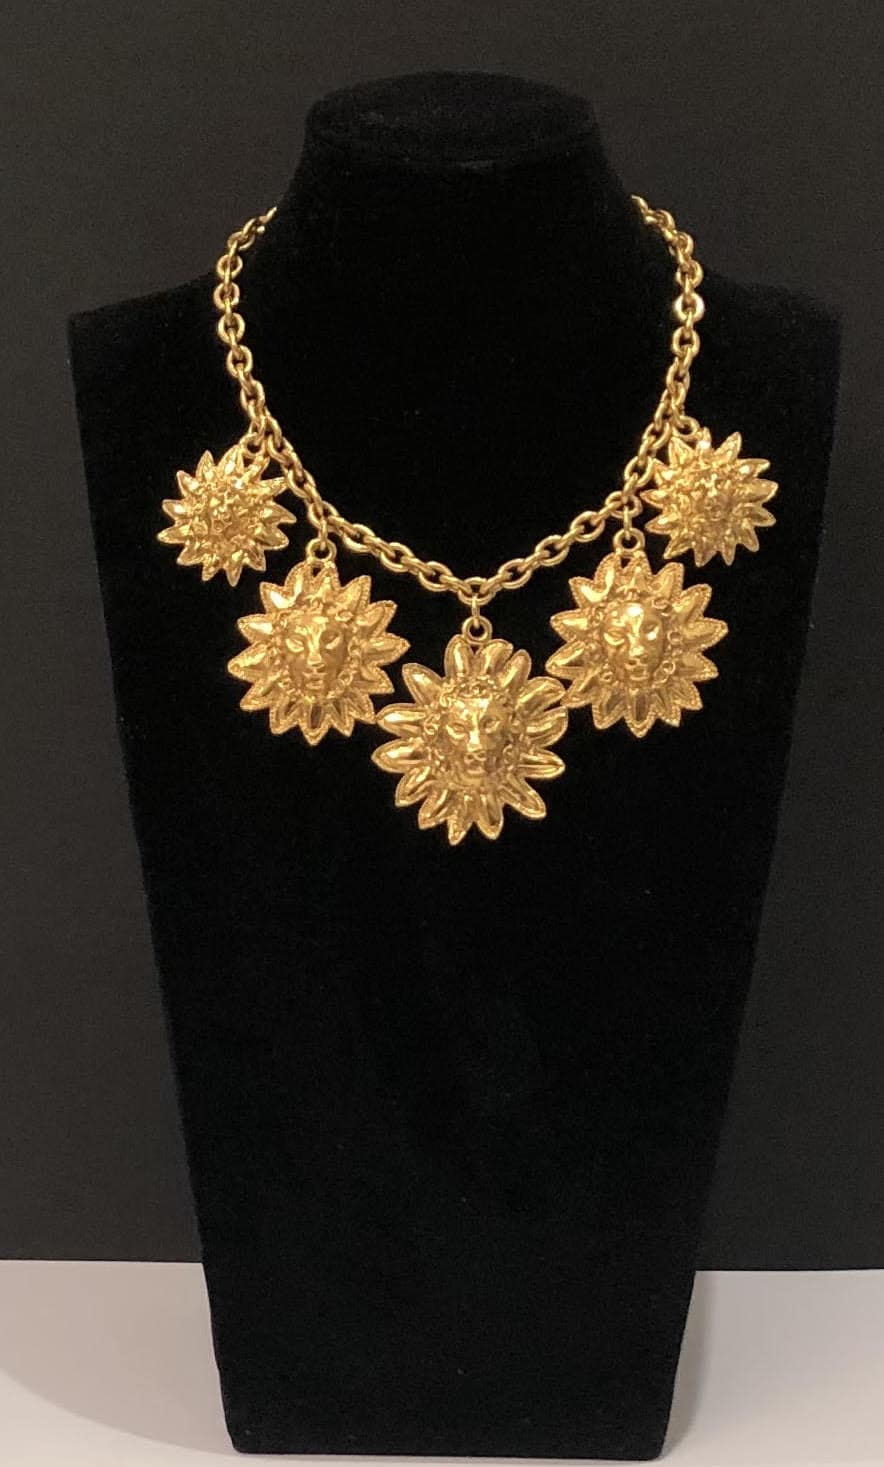 Lion Head Necklace / CHANEL star , New never been worn Gold